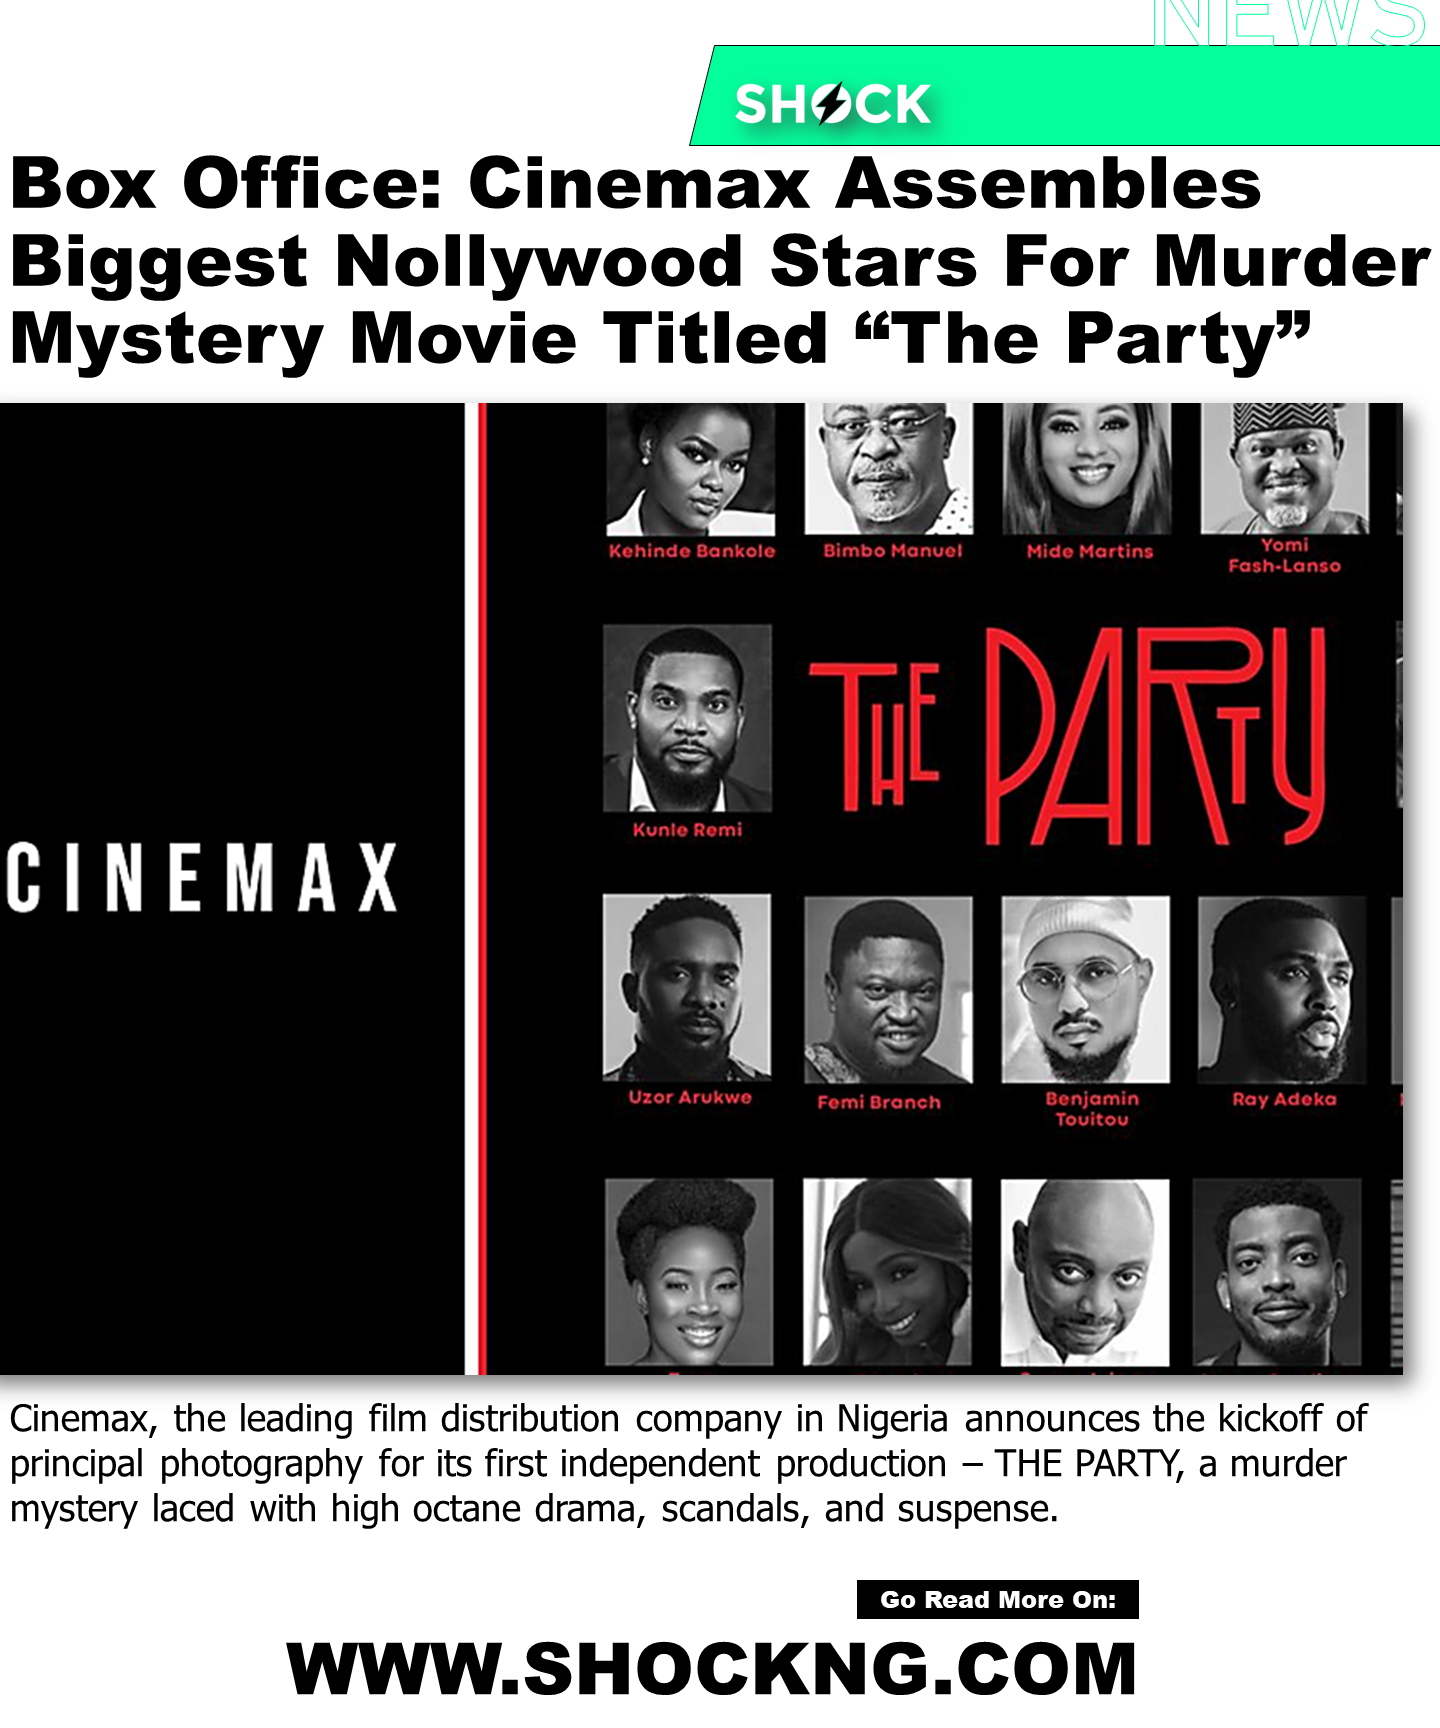 The party cinemax - Cinemax Assembles Biggest Nollywood Stars For Murder Mystery Title: “The Party”